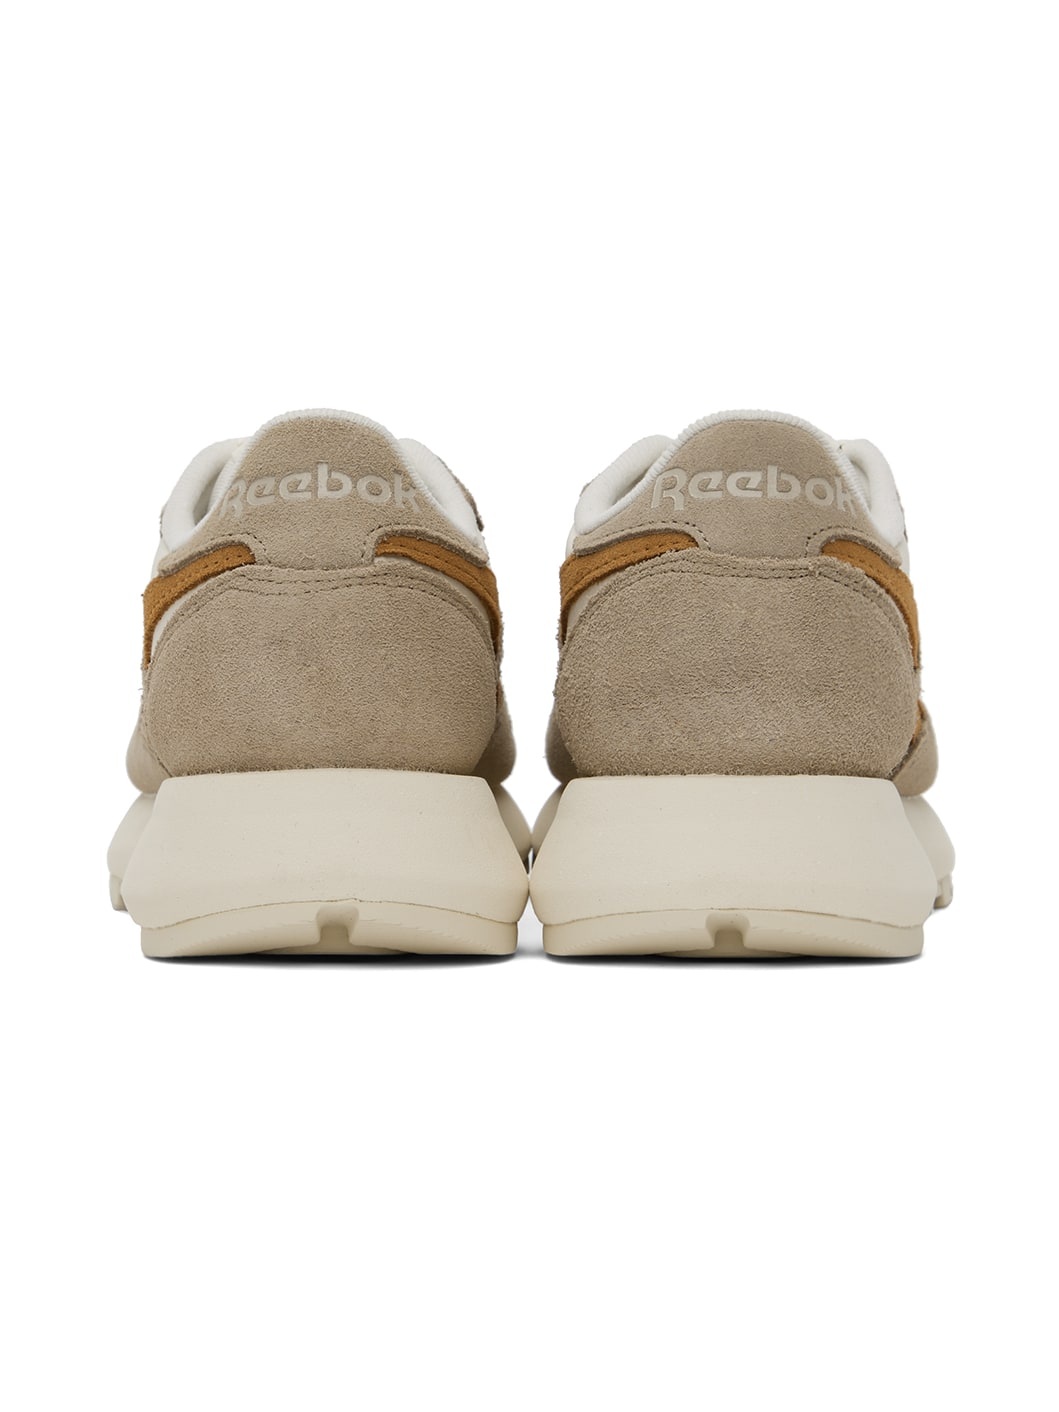 White & Beige Classic Sneakers - 2